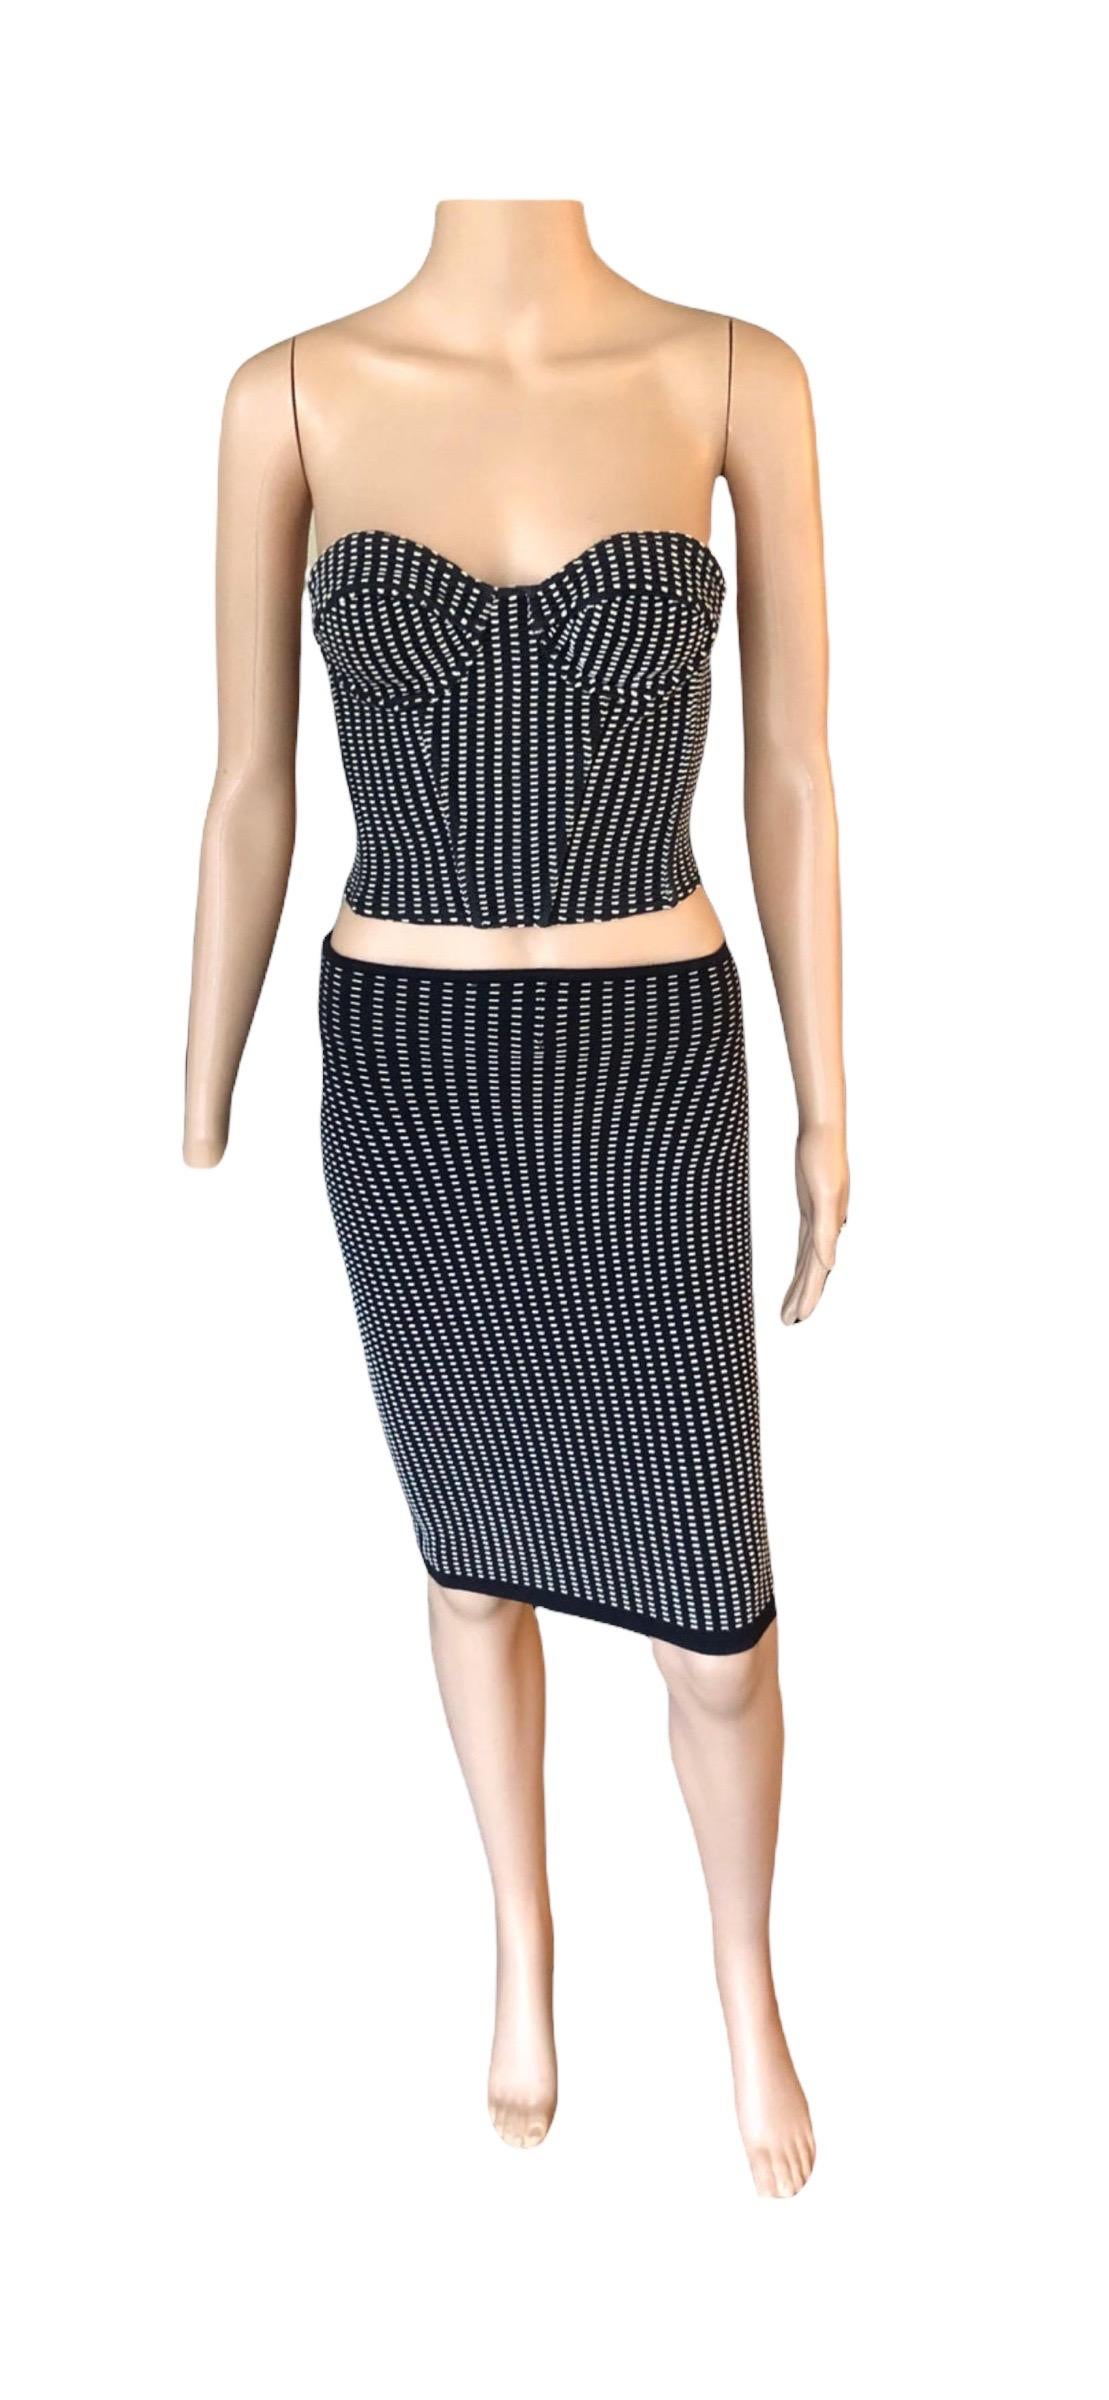 Azzedine Alaia S/S 1991 Vintage Skirt and Bustier Crop Top 2 Piece Set  8